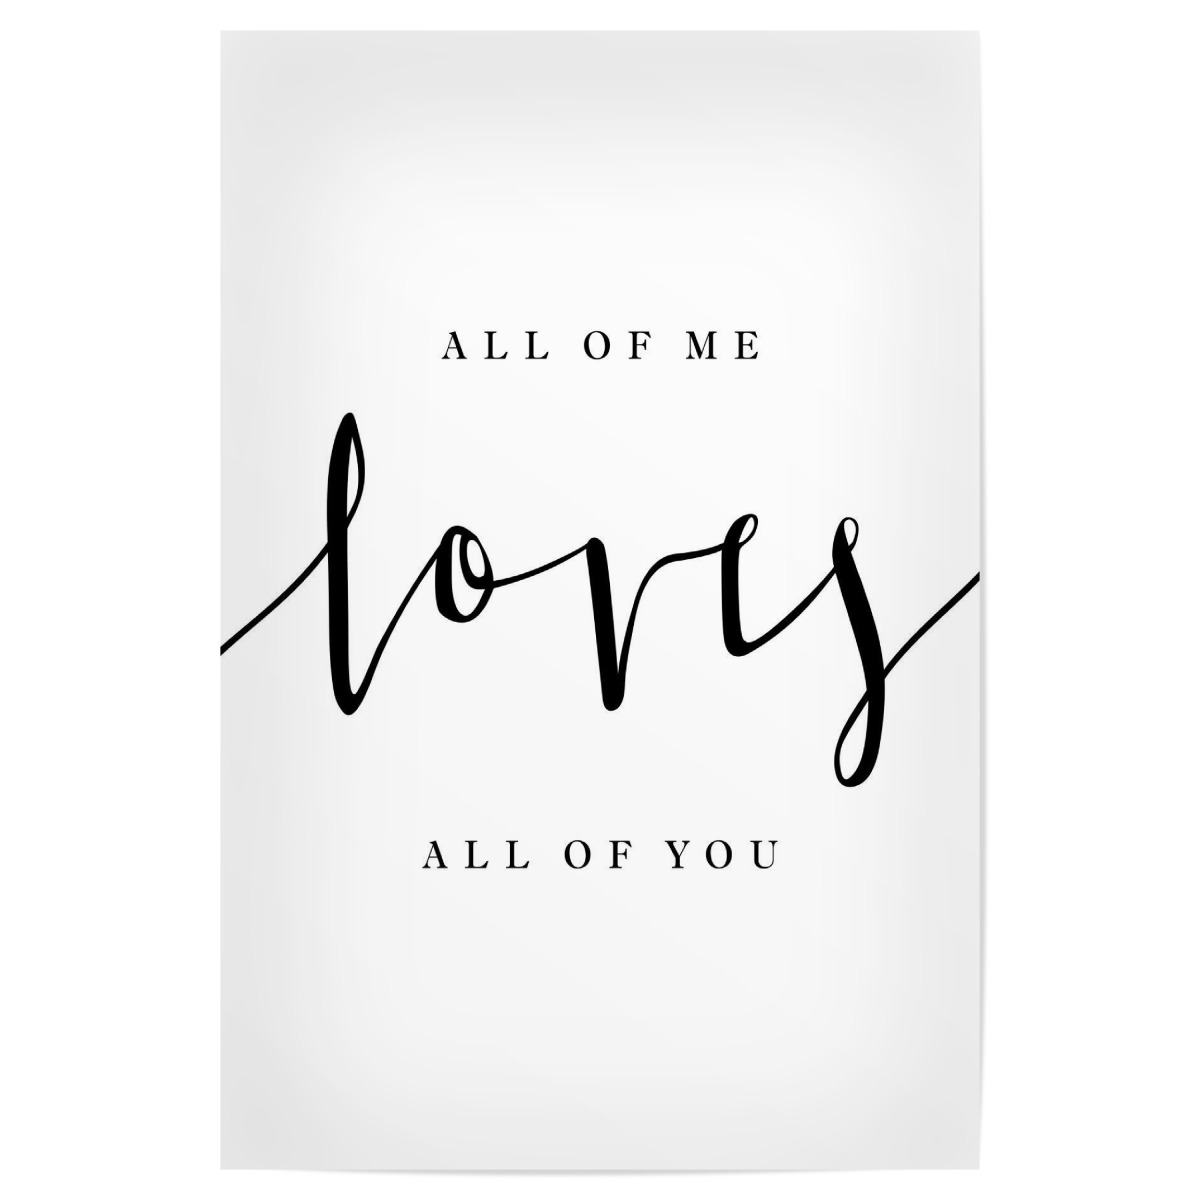 All Of Me Loves You Als Poster Bei Artboxone Kaufen